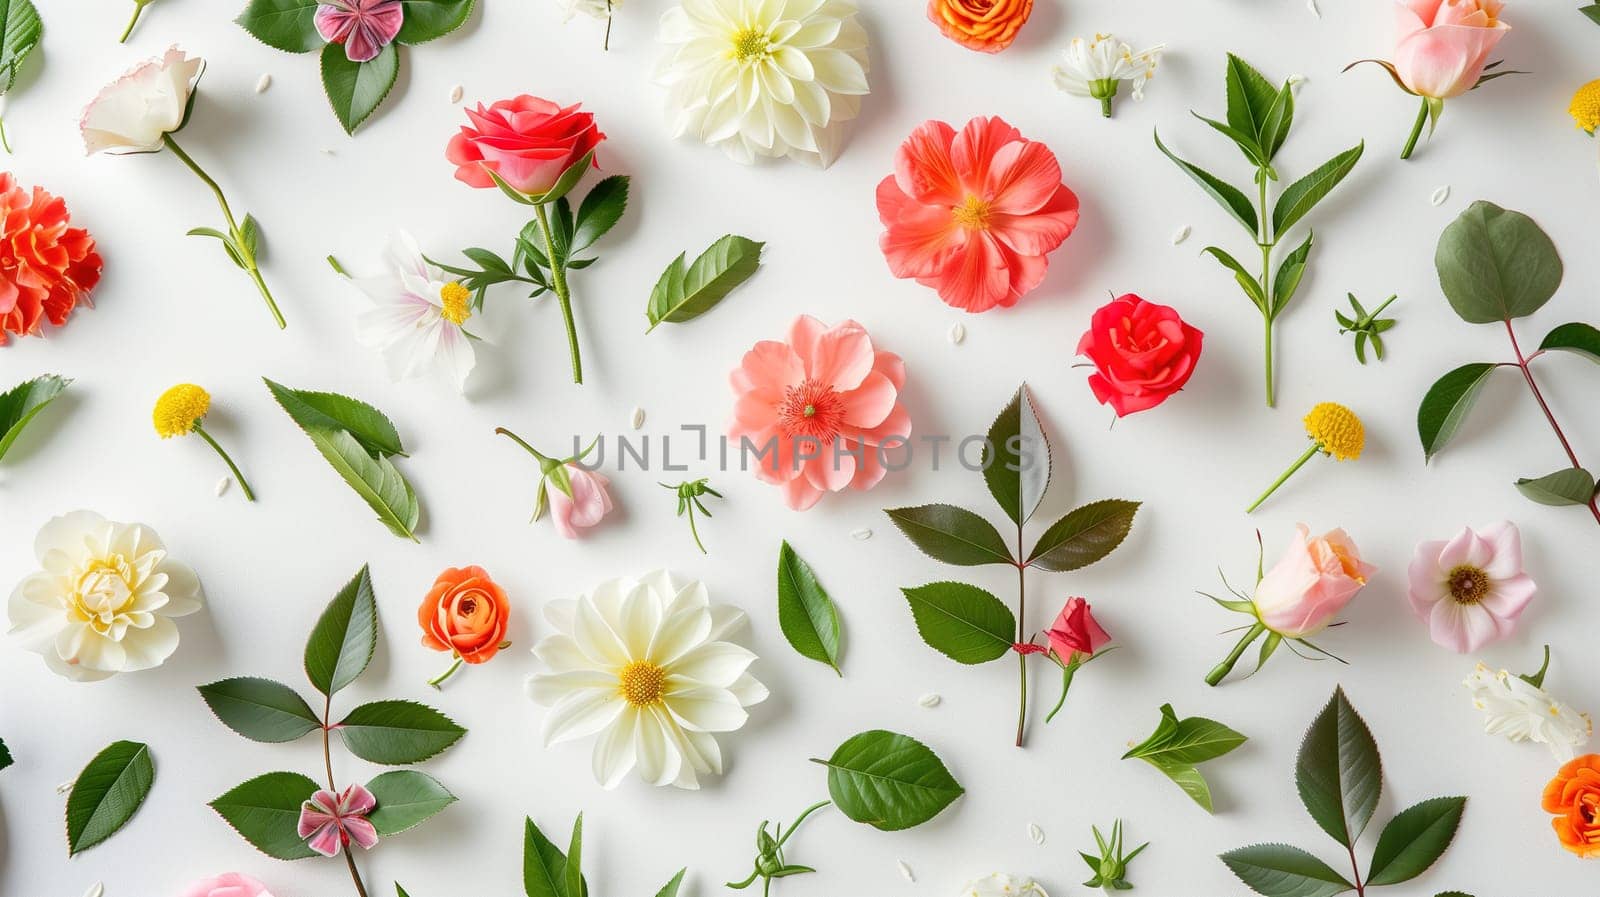 A collection of vibrant flowers in different hues scattered on a clean, white background. Each flower showcases its unique colors and shapes, creating a visually striking composition.